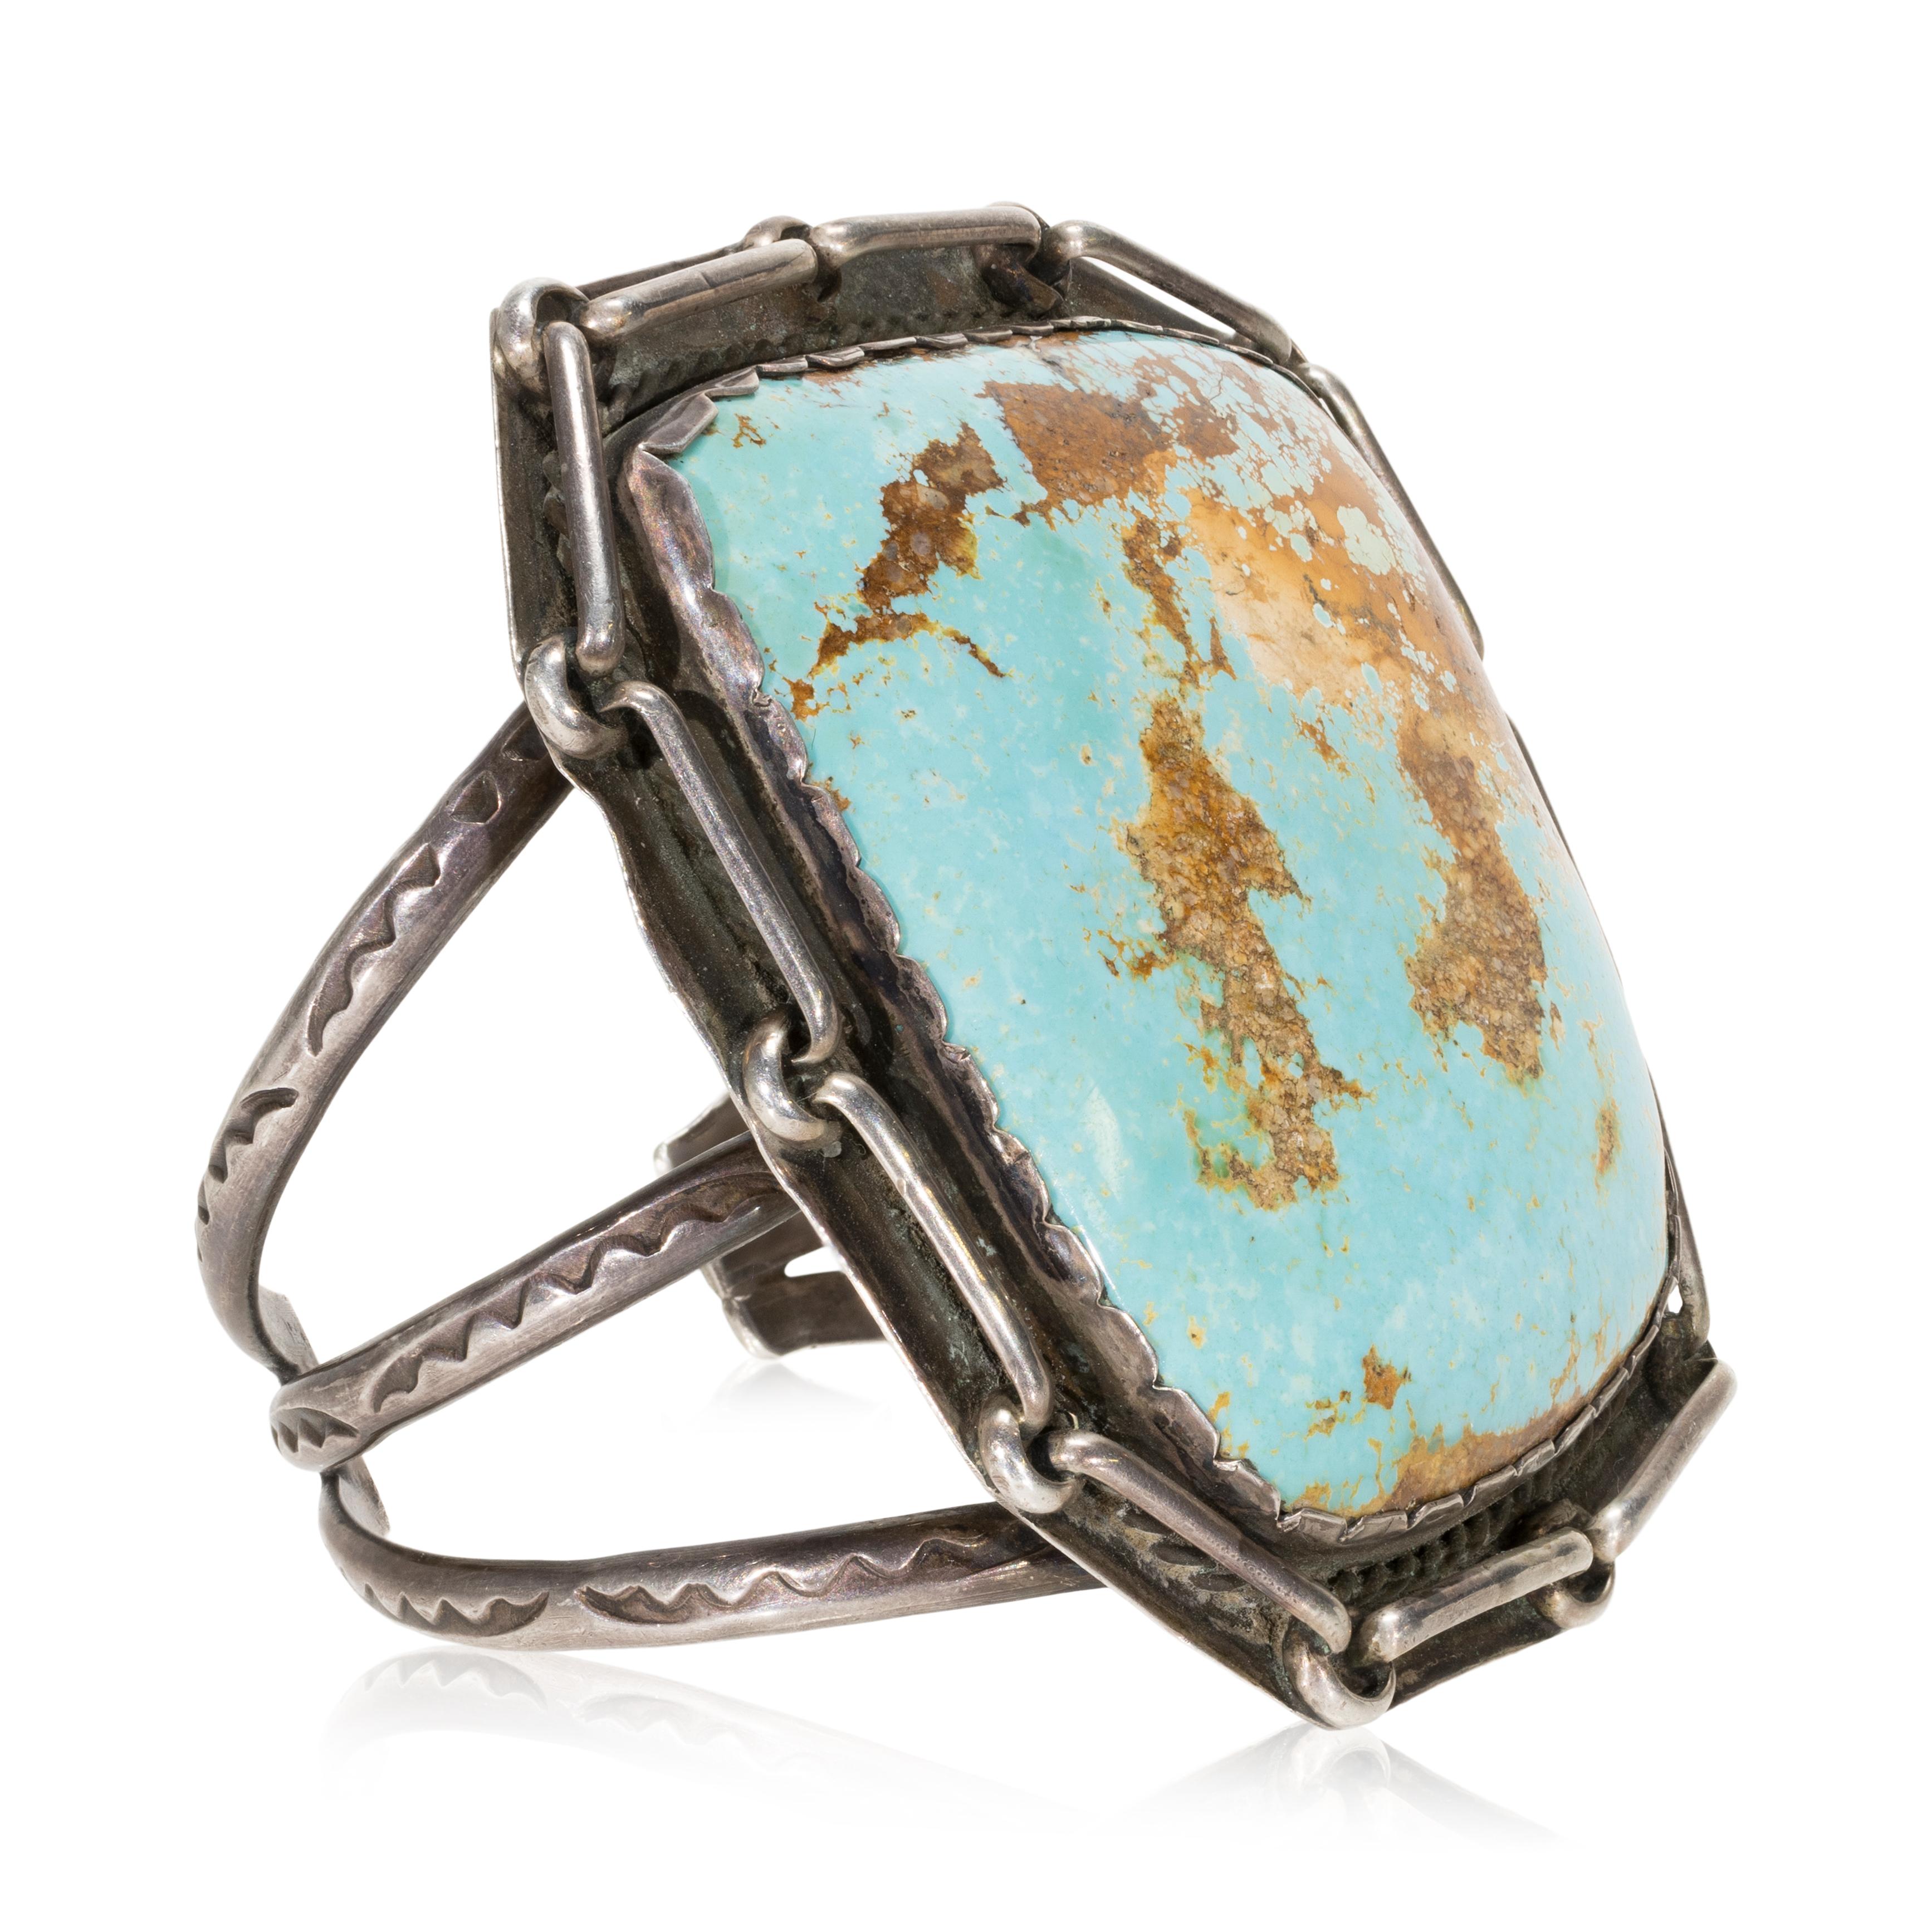 Large Navajo Royston turquoise and sterling silver bracelet. Large beautiful center stone surrounded by chain links in shadow box design with twisted rope border and three bands along sides with hand stamped detail. Heavy patina but can be buffed